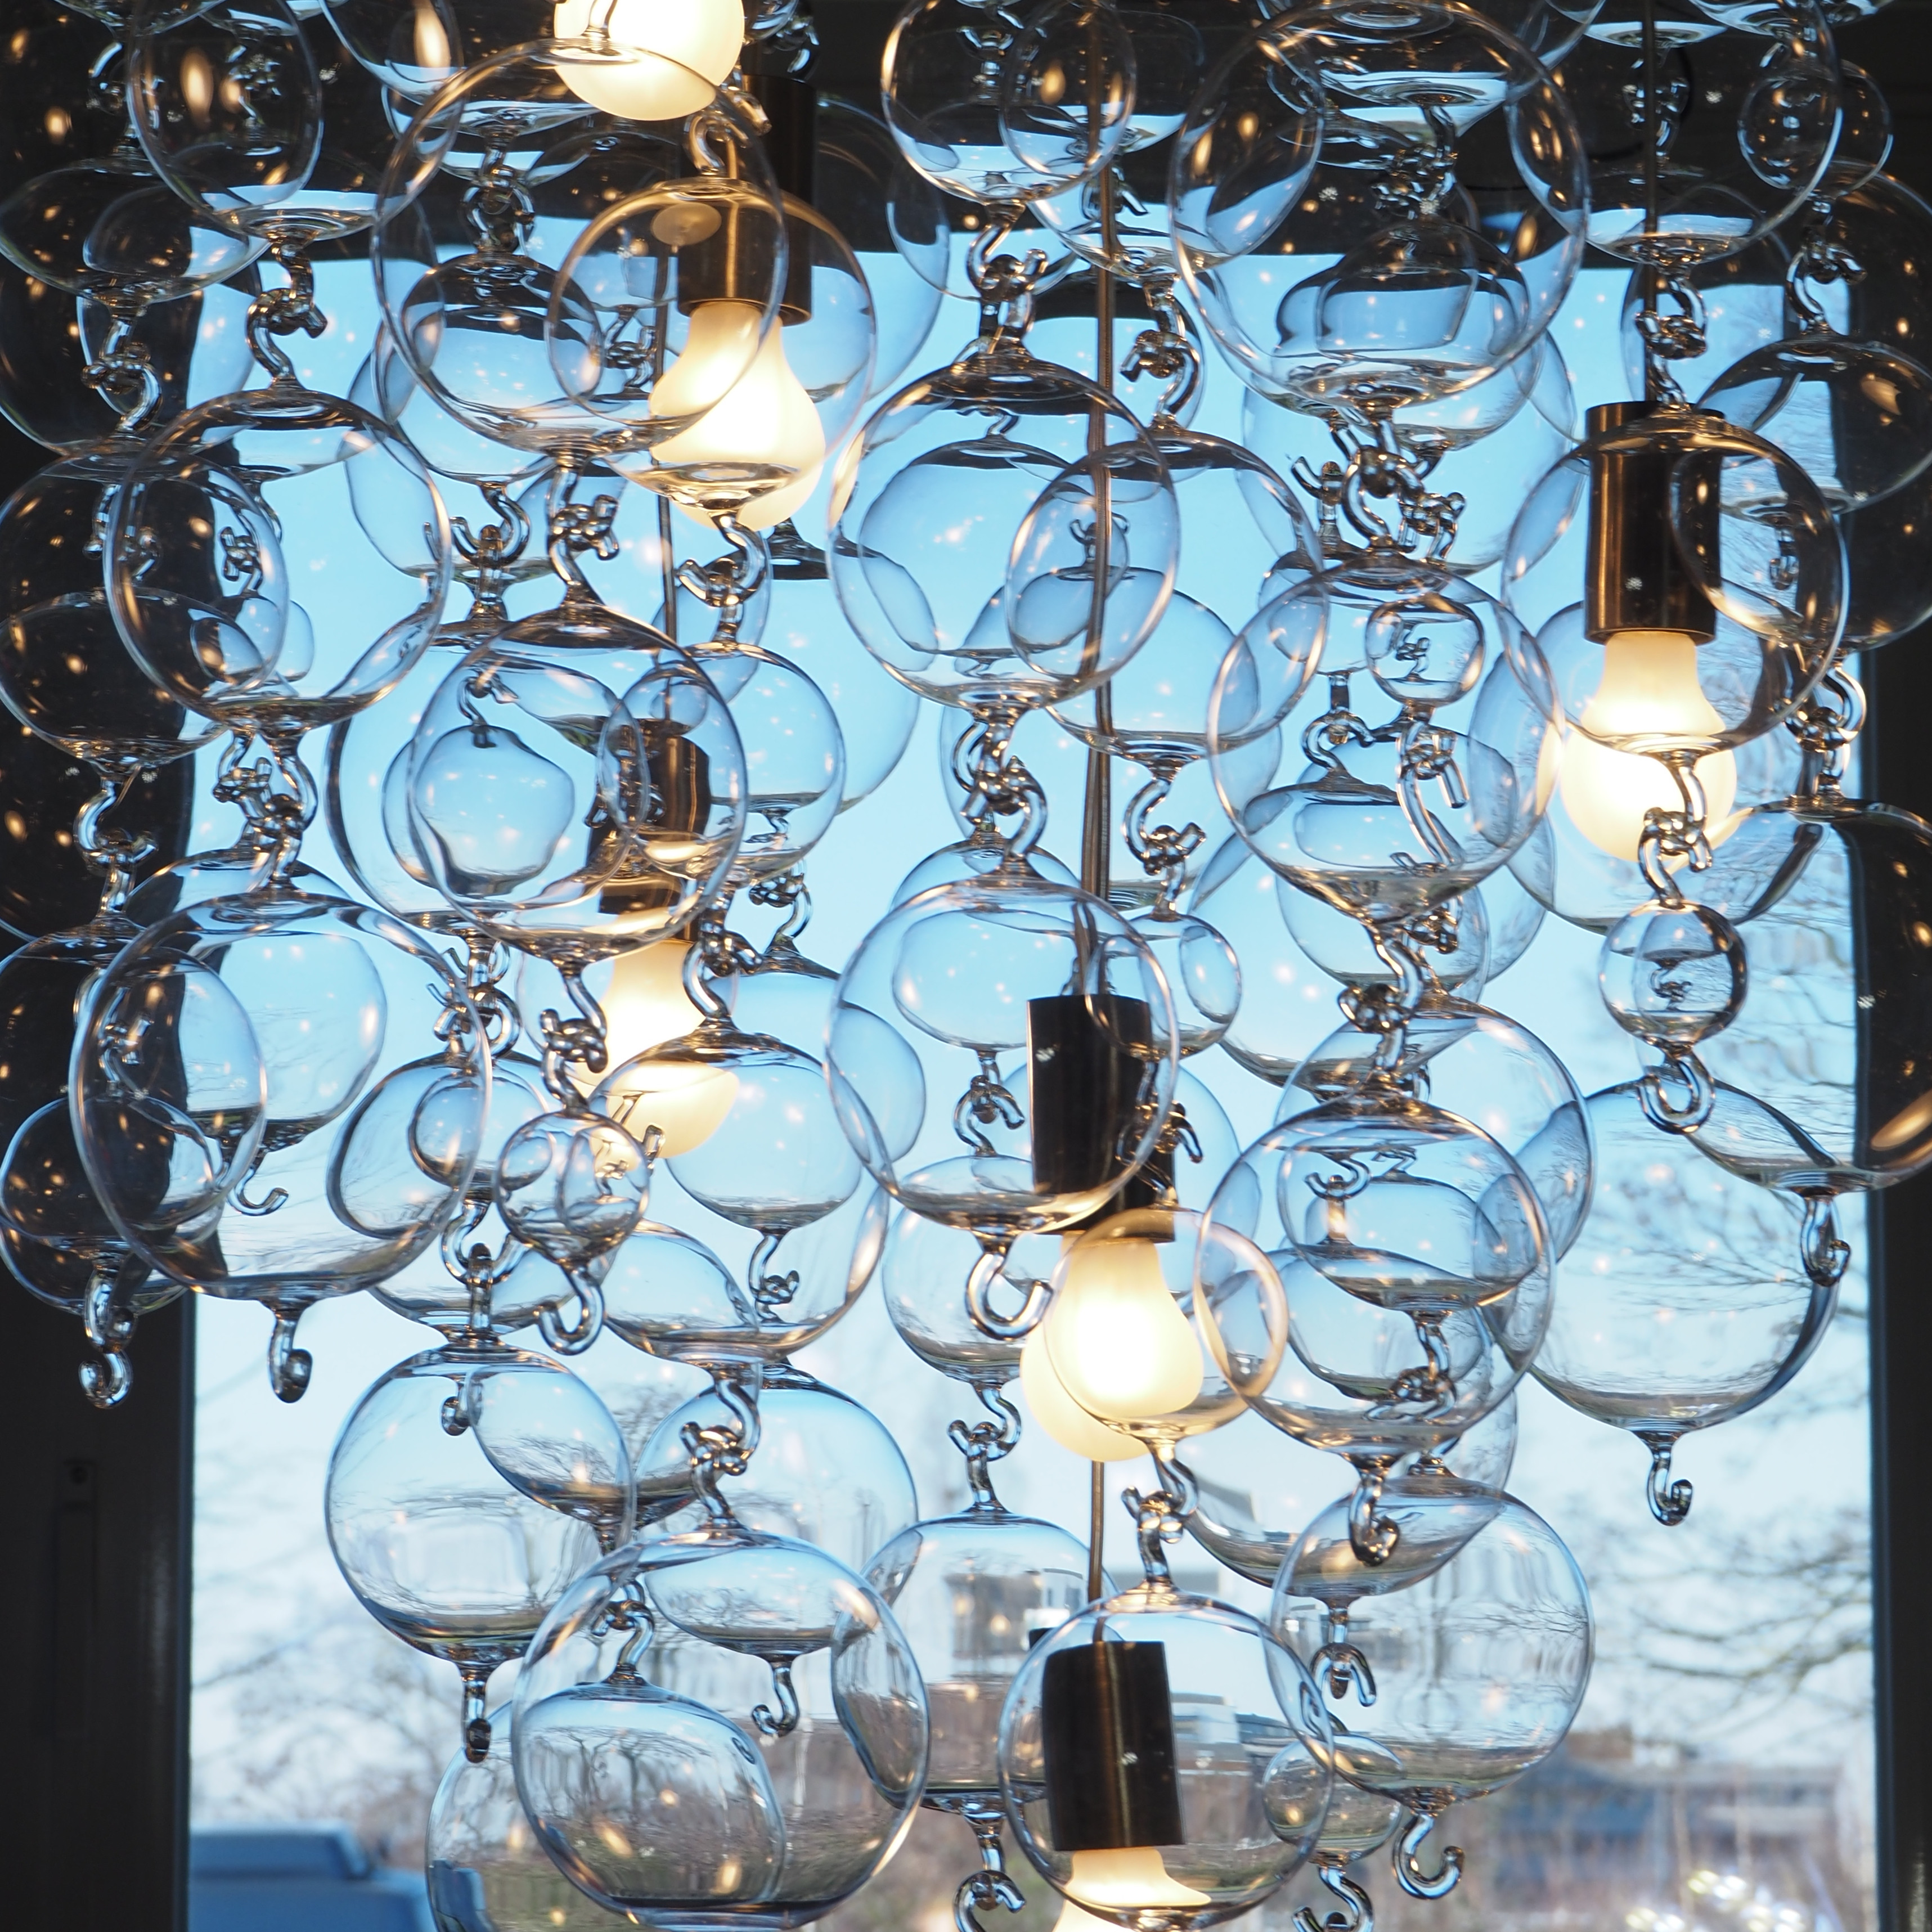 Medium chandelier with glass bubbles